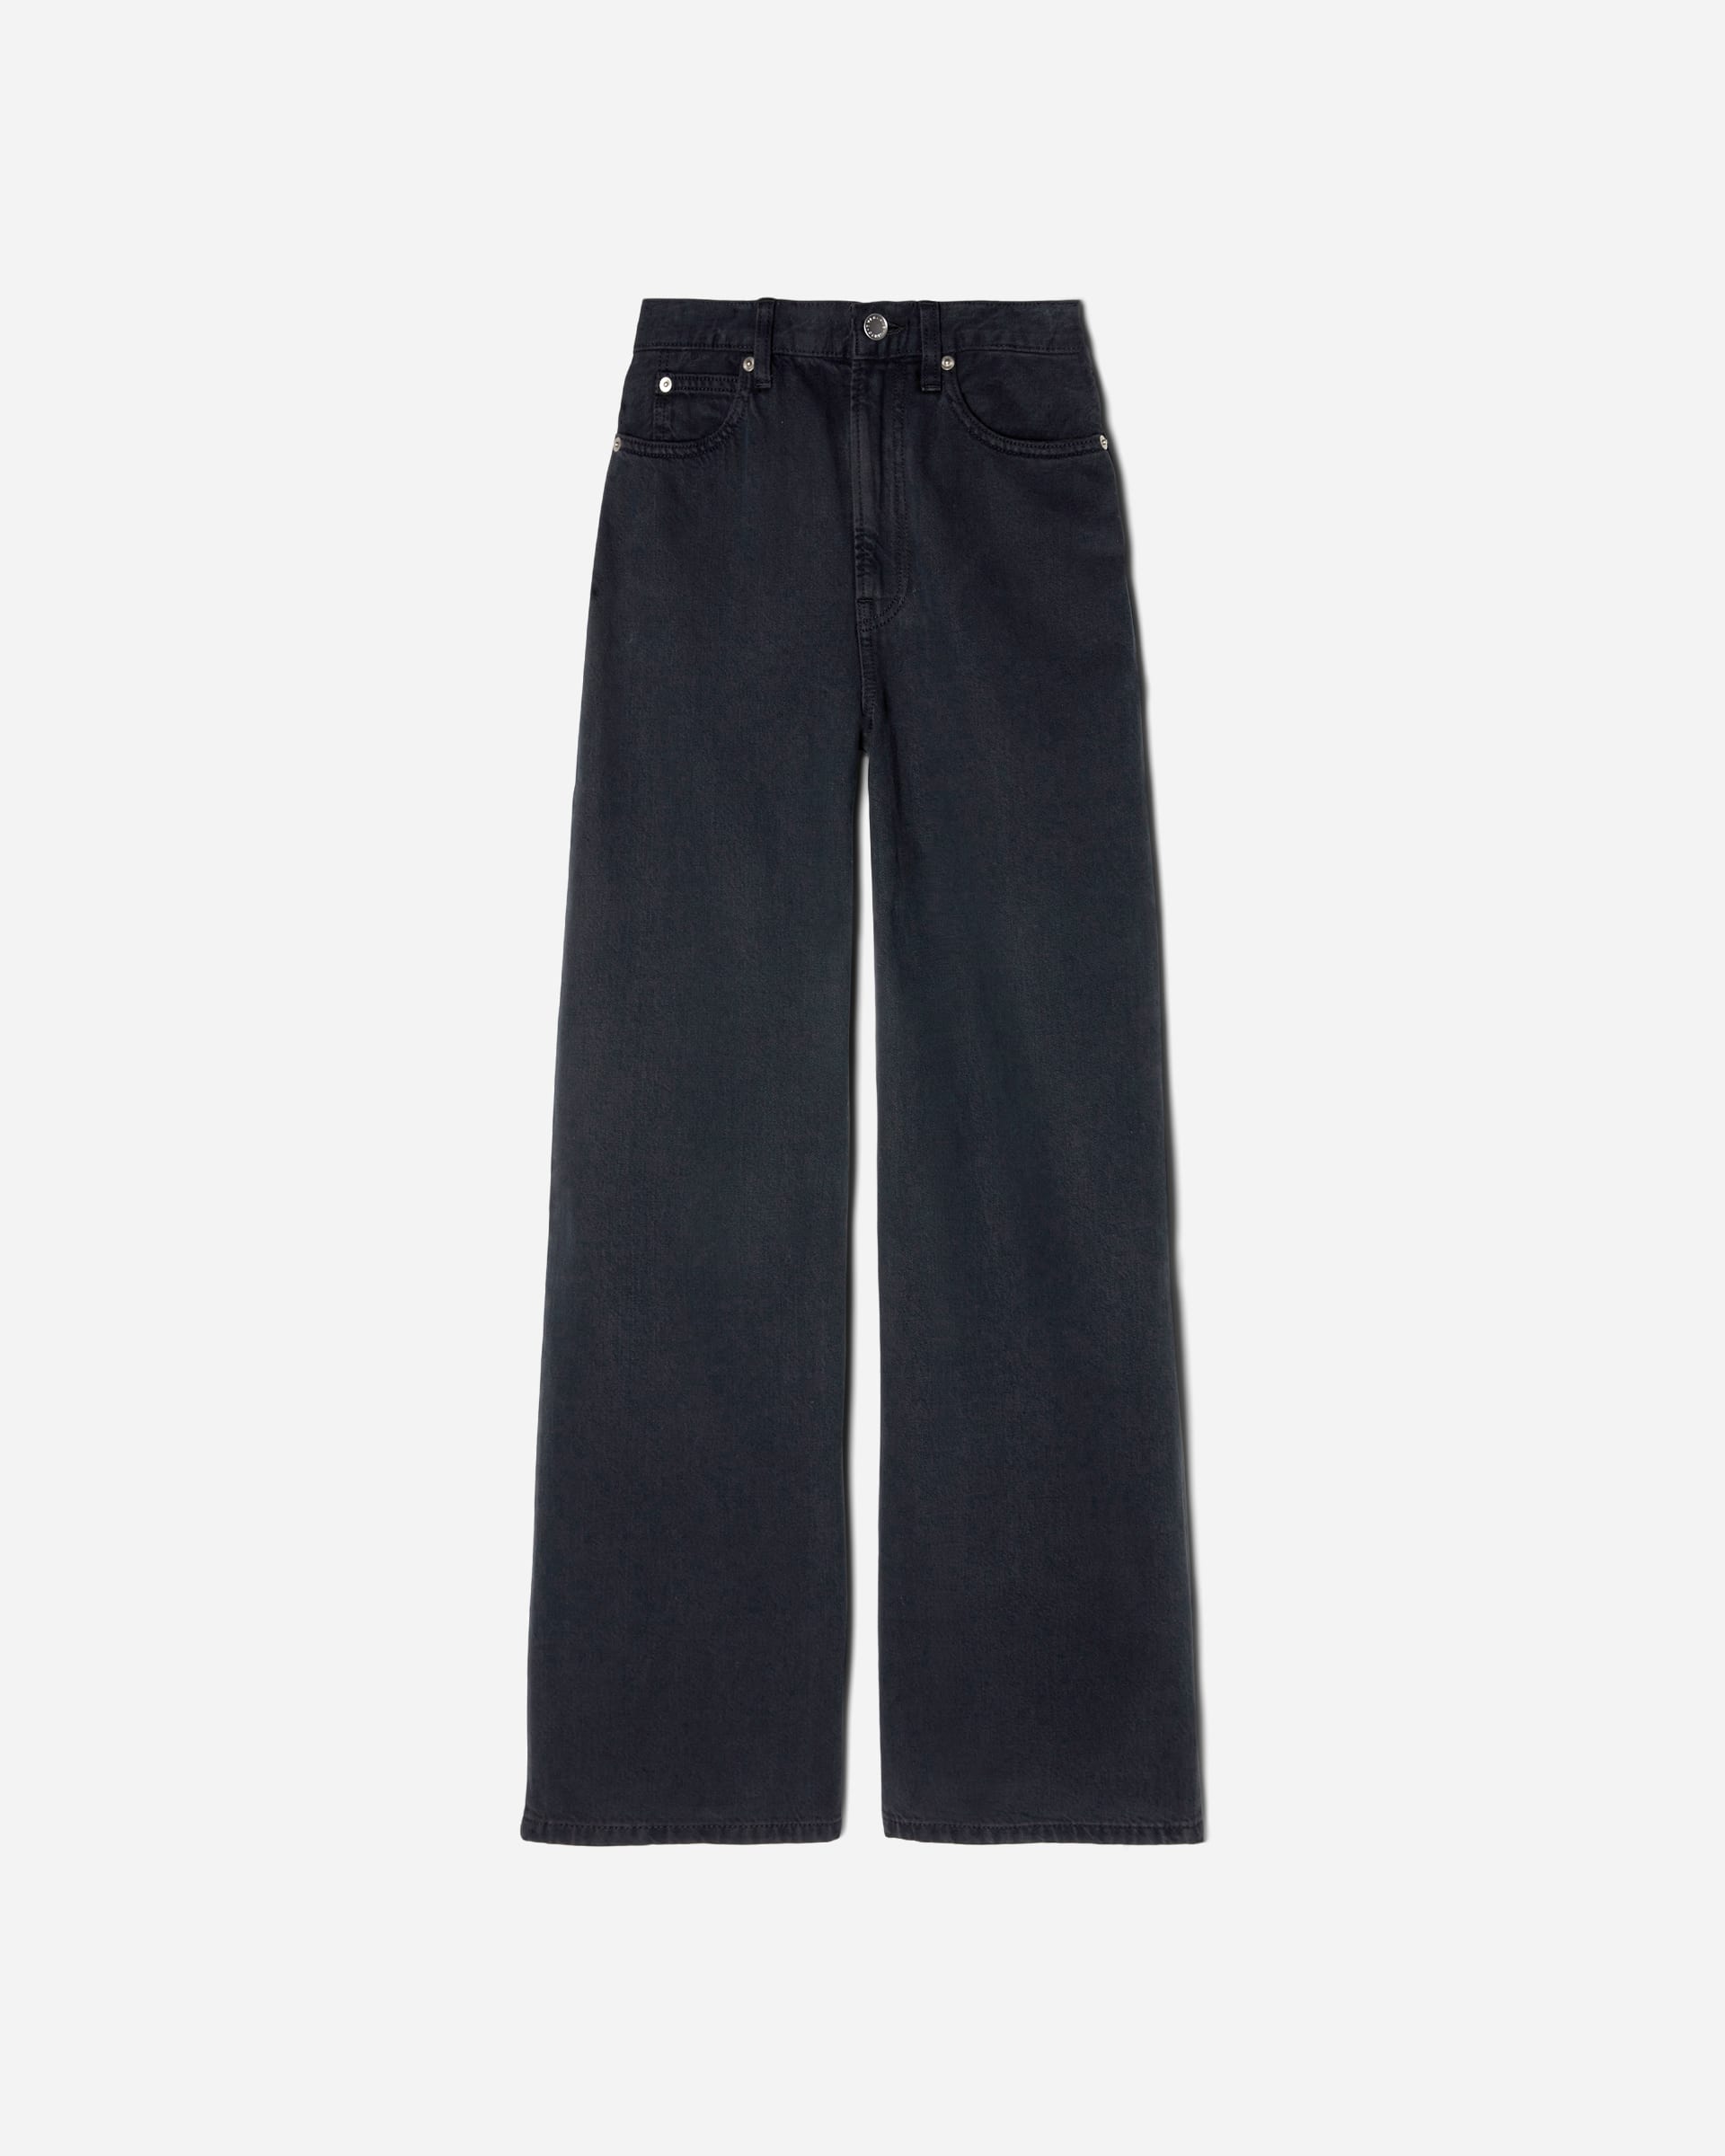 The Baggy Jean Ink Wash – Everlane